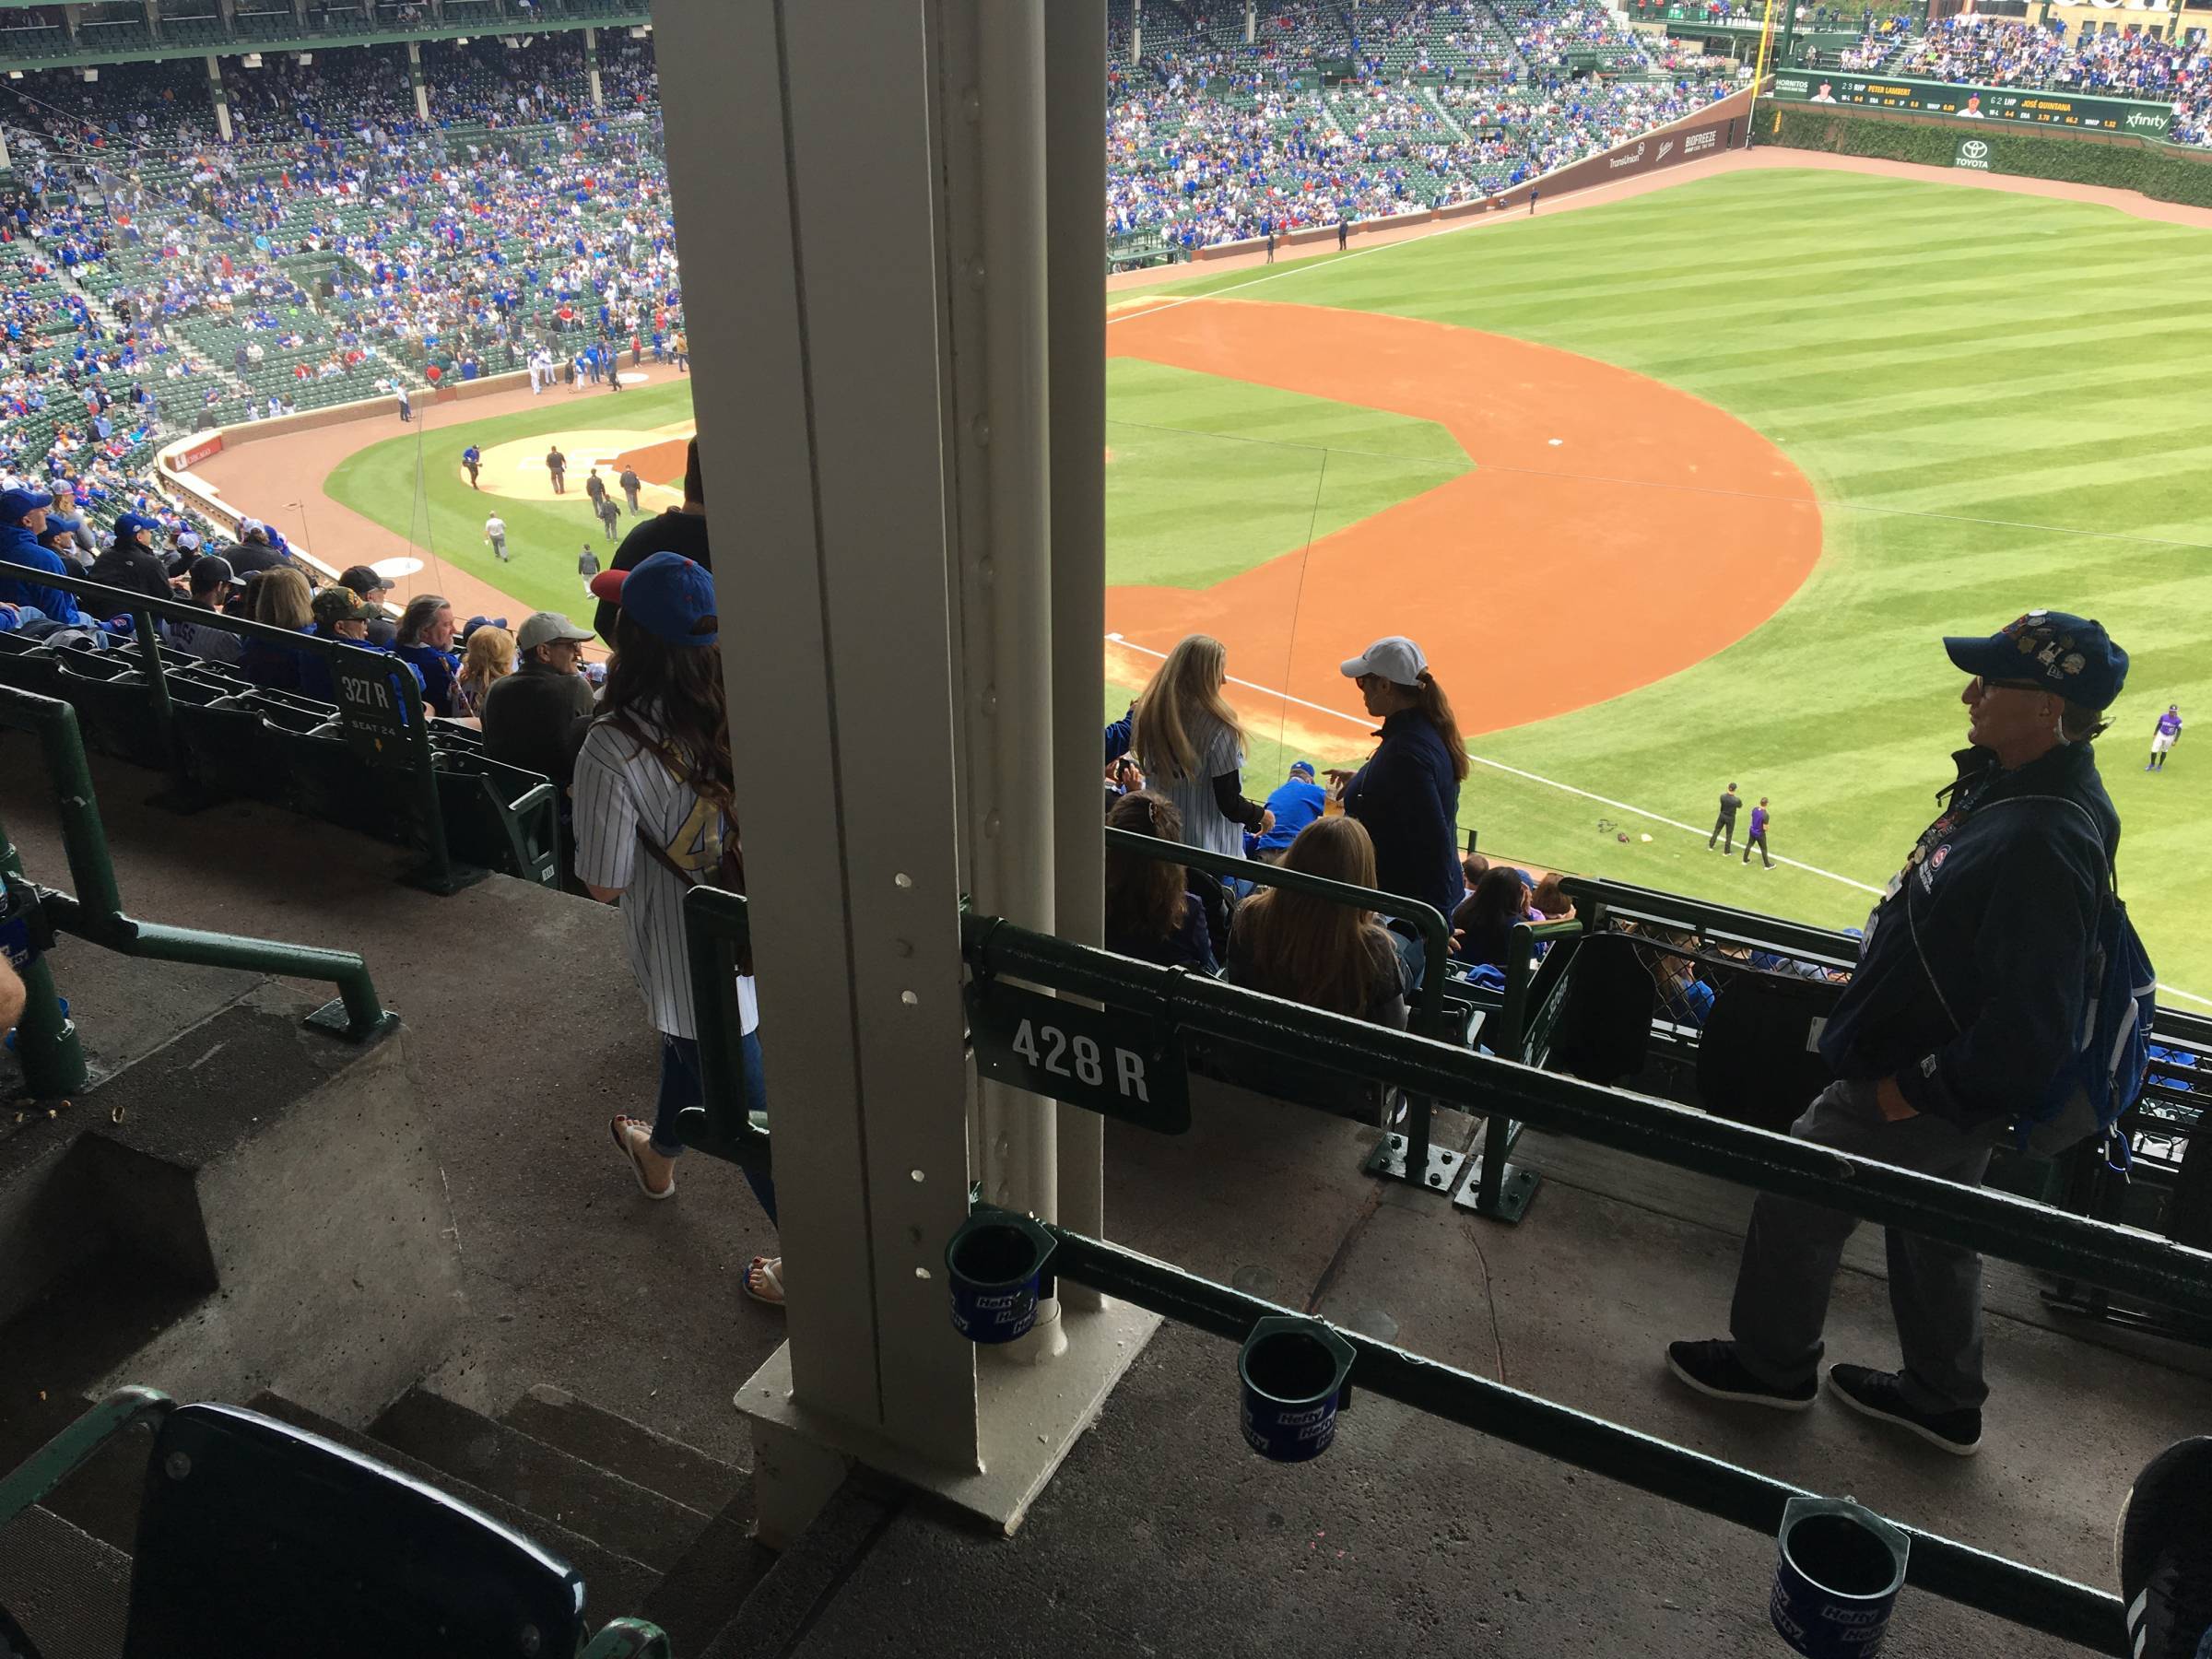 Pole in Section 428R at Wrigley Field